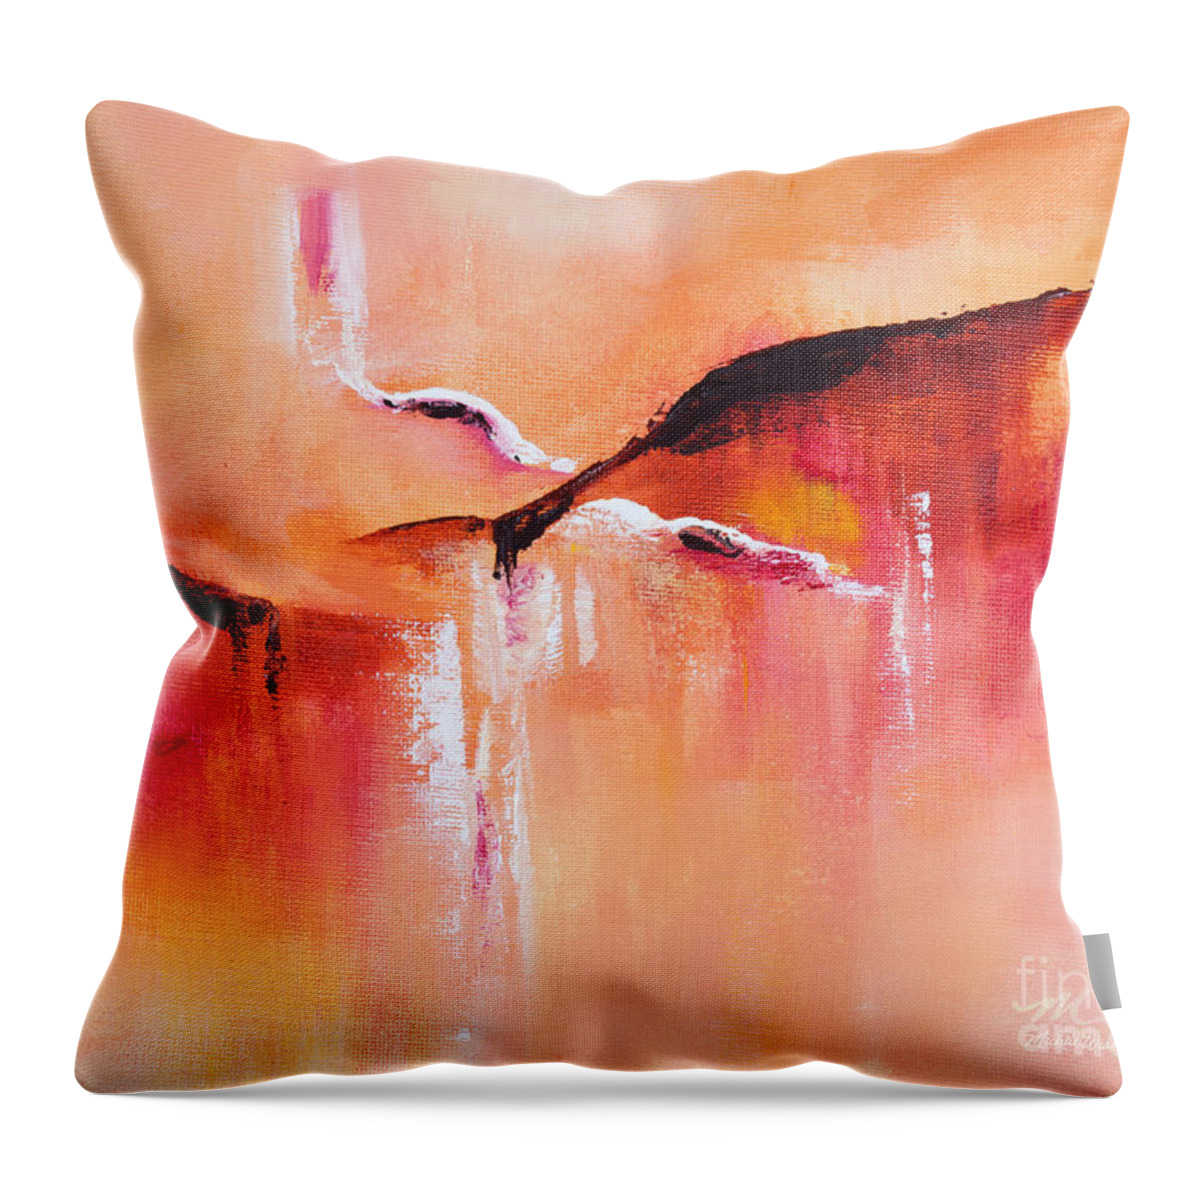 Synchronicity Throw Pillow featuring the painting Synchronicity by Michelle Constantine